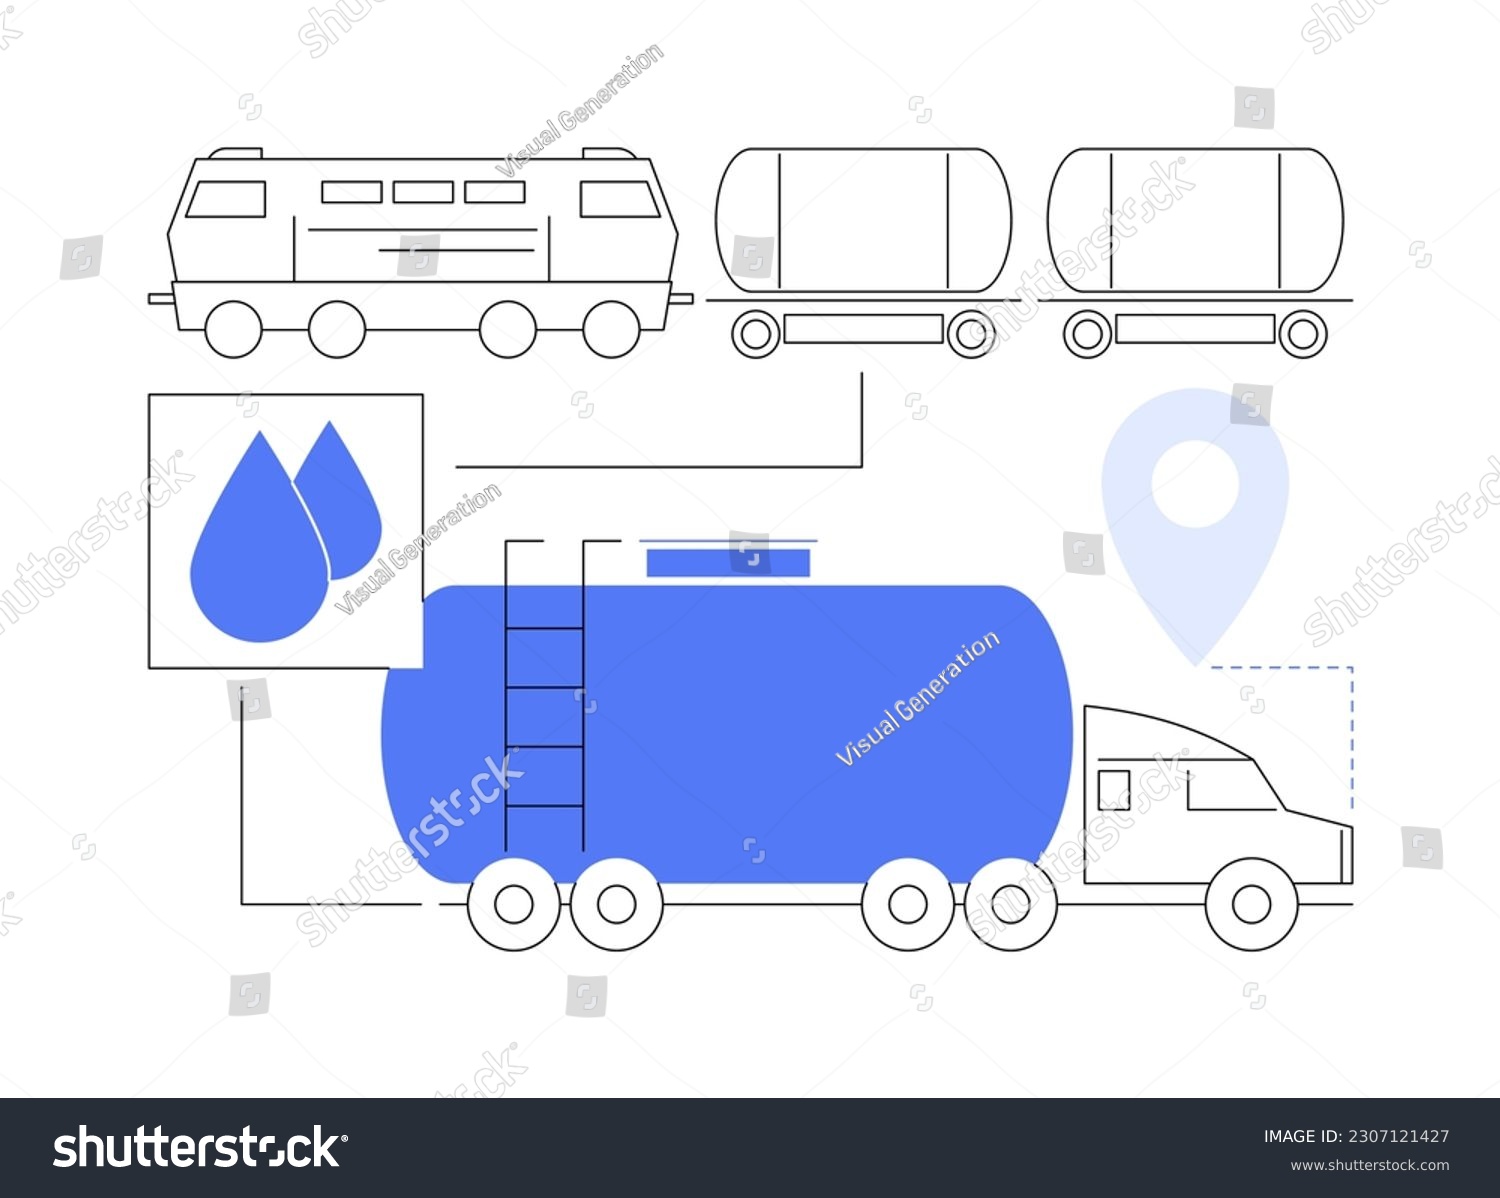 SVG of Liquid bulk goods transportation abstract concept vector illustration. Transportation of liquid in a tank, industrial ground vehicle, freight tank train loading, goods export abstract metaphor. svg